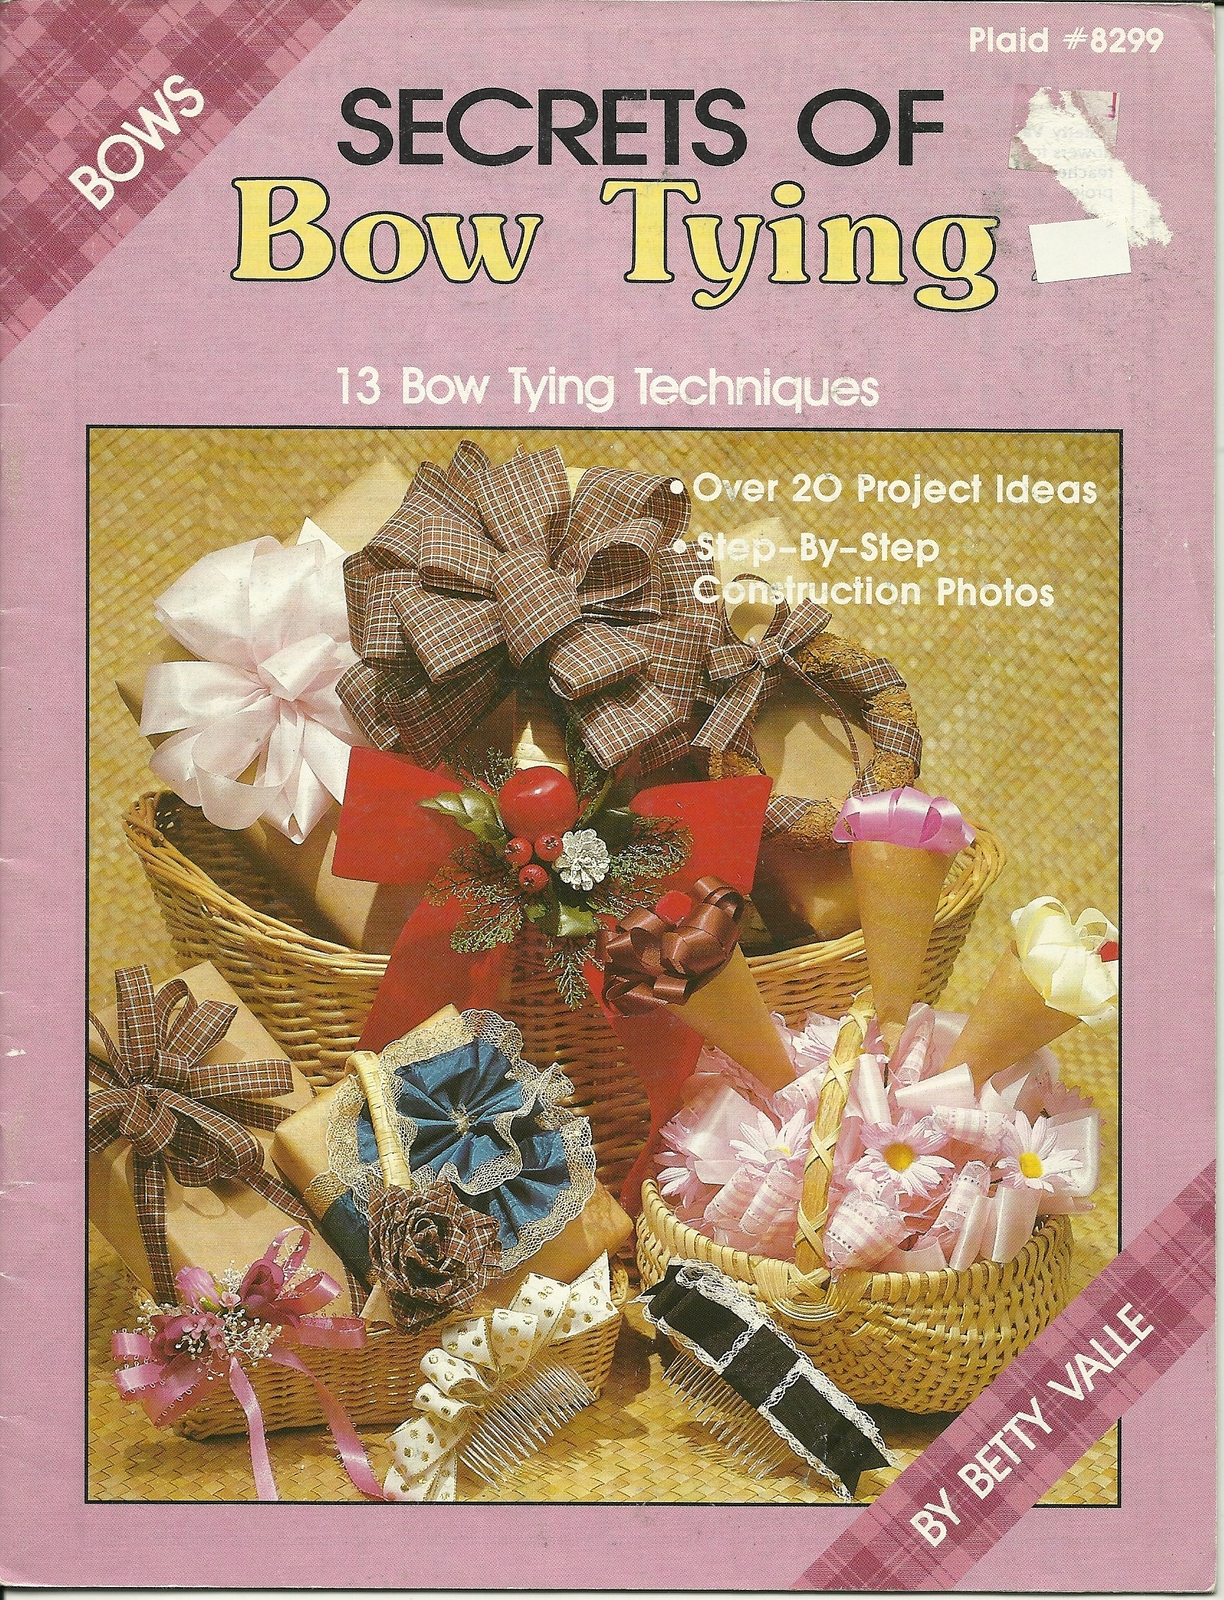 Secrets of Bow Tying Book 8299 Betty Valle Plaid - $4.99